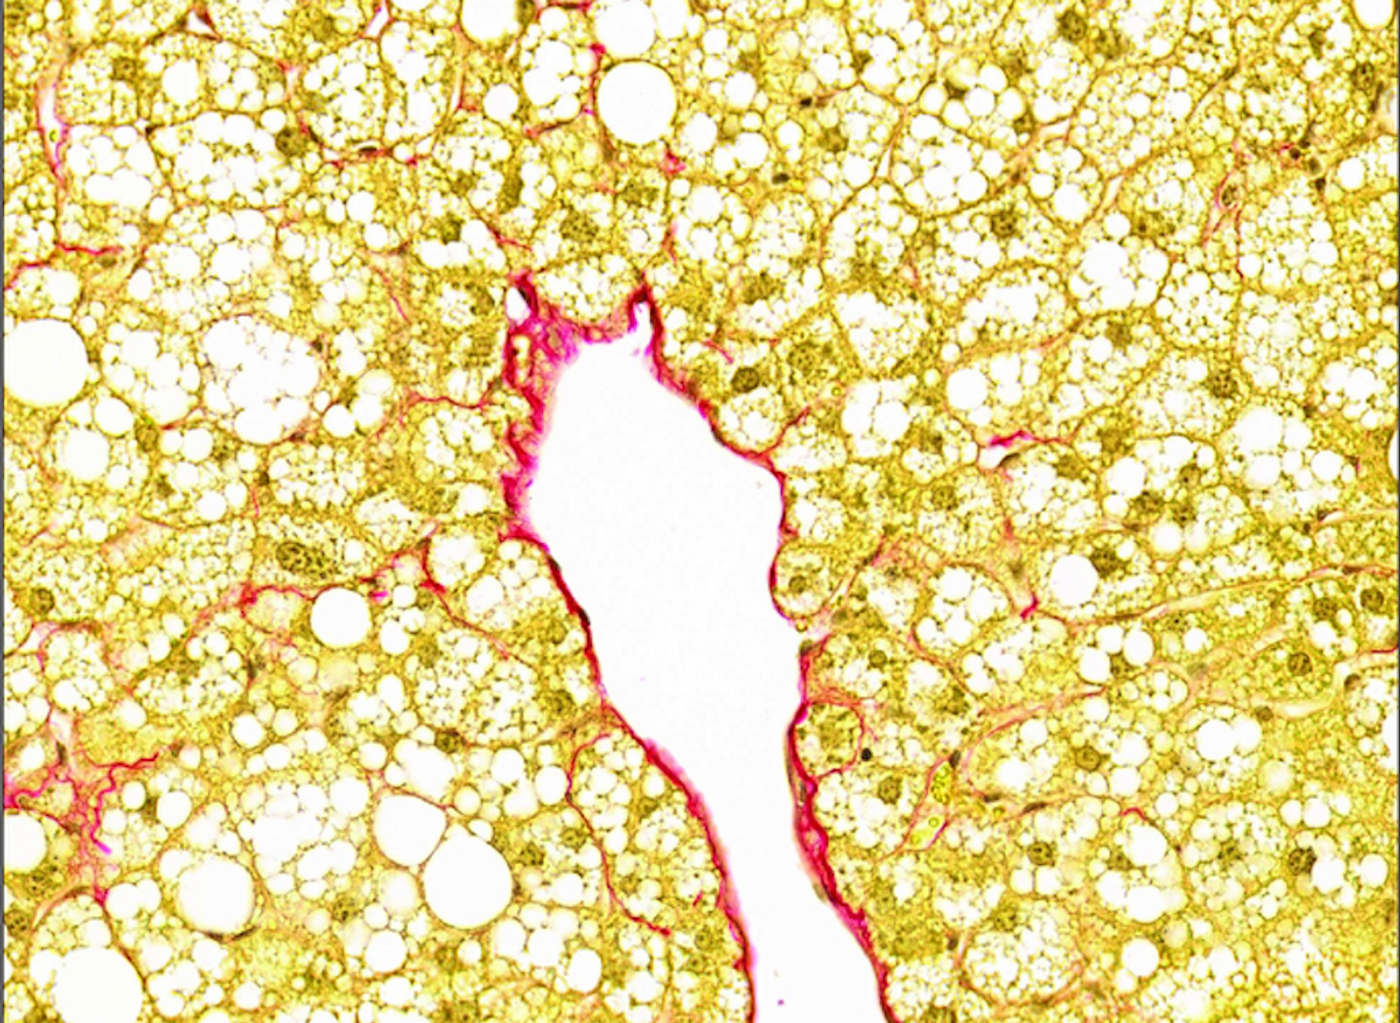 A diseased liver tissue sample with typical features. Fat-filled hepatocytes (yellow) and collagen build-up (red) display fibrosis and fatty liver disease. / Credit: WEHI